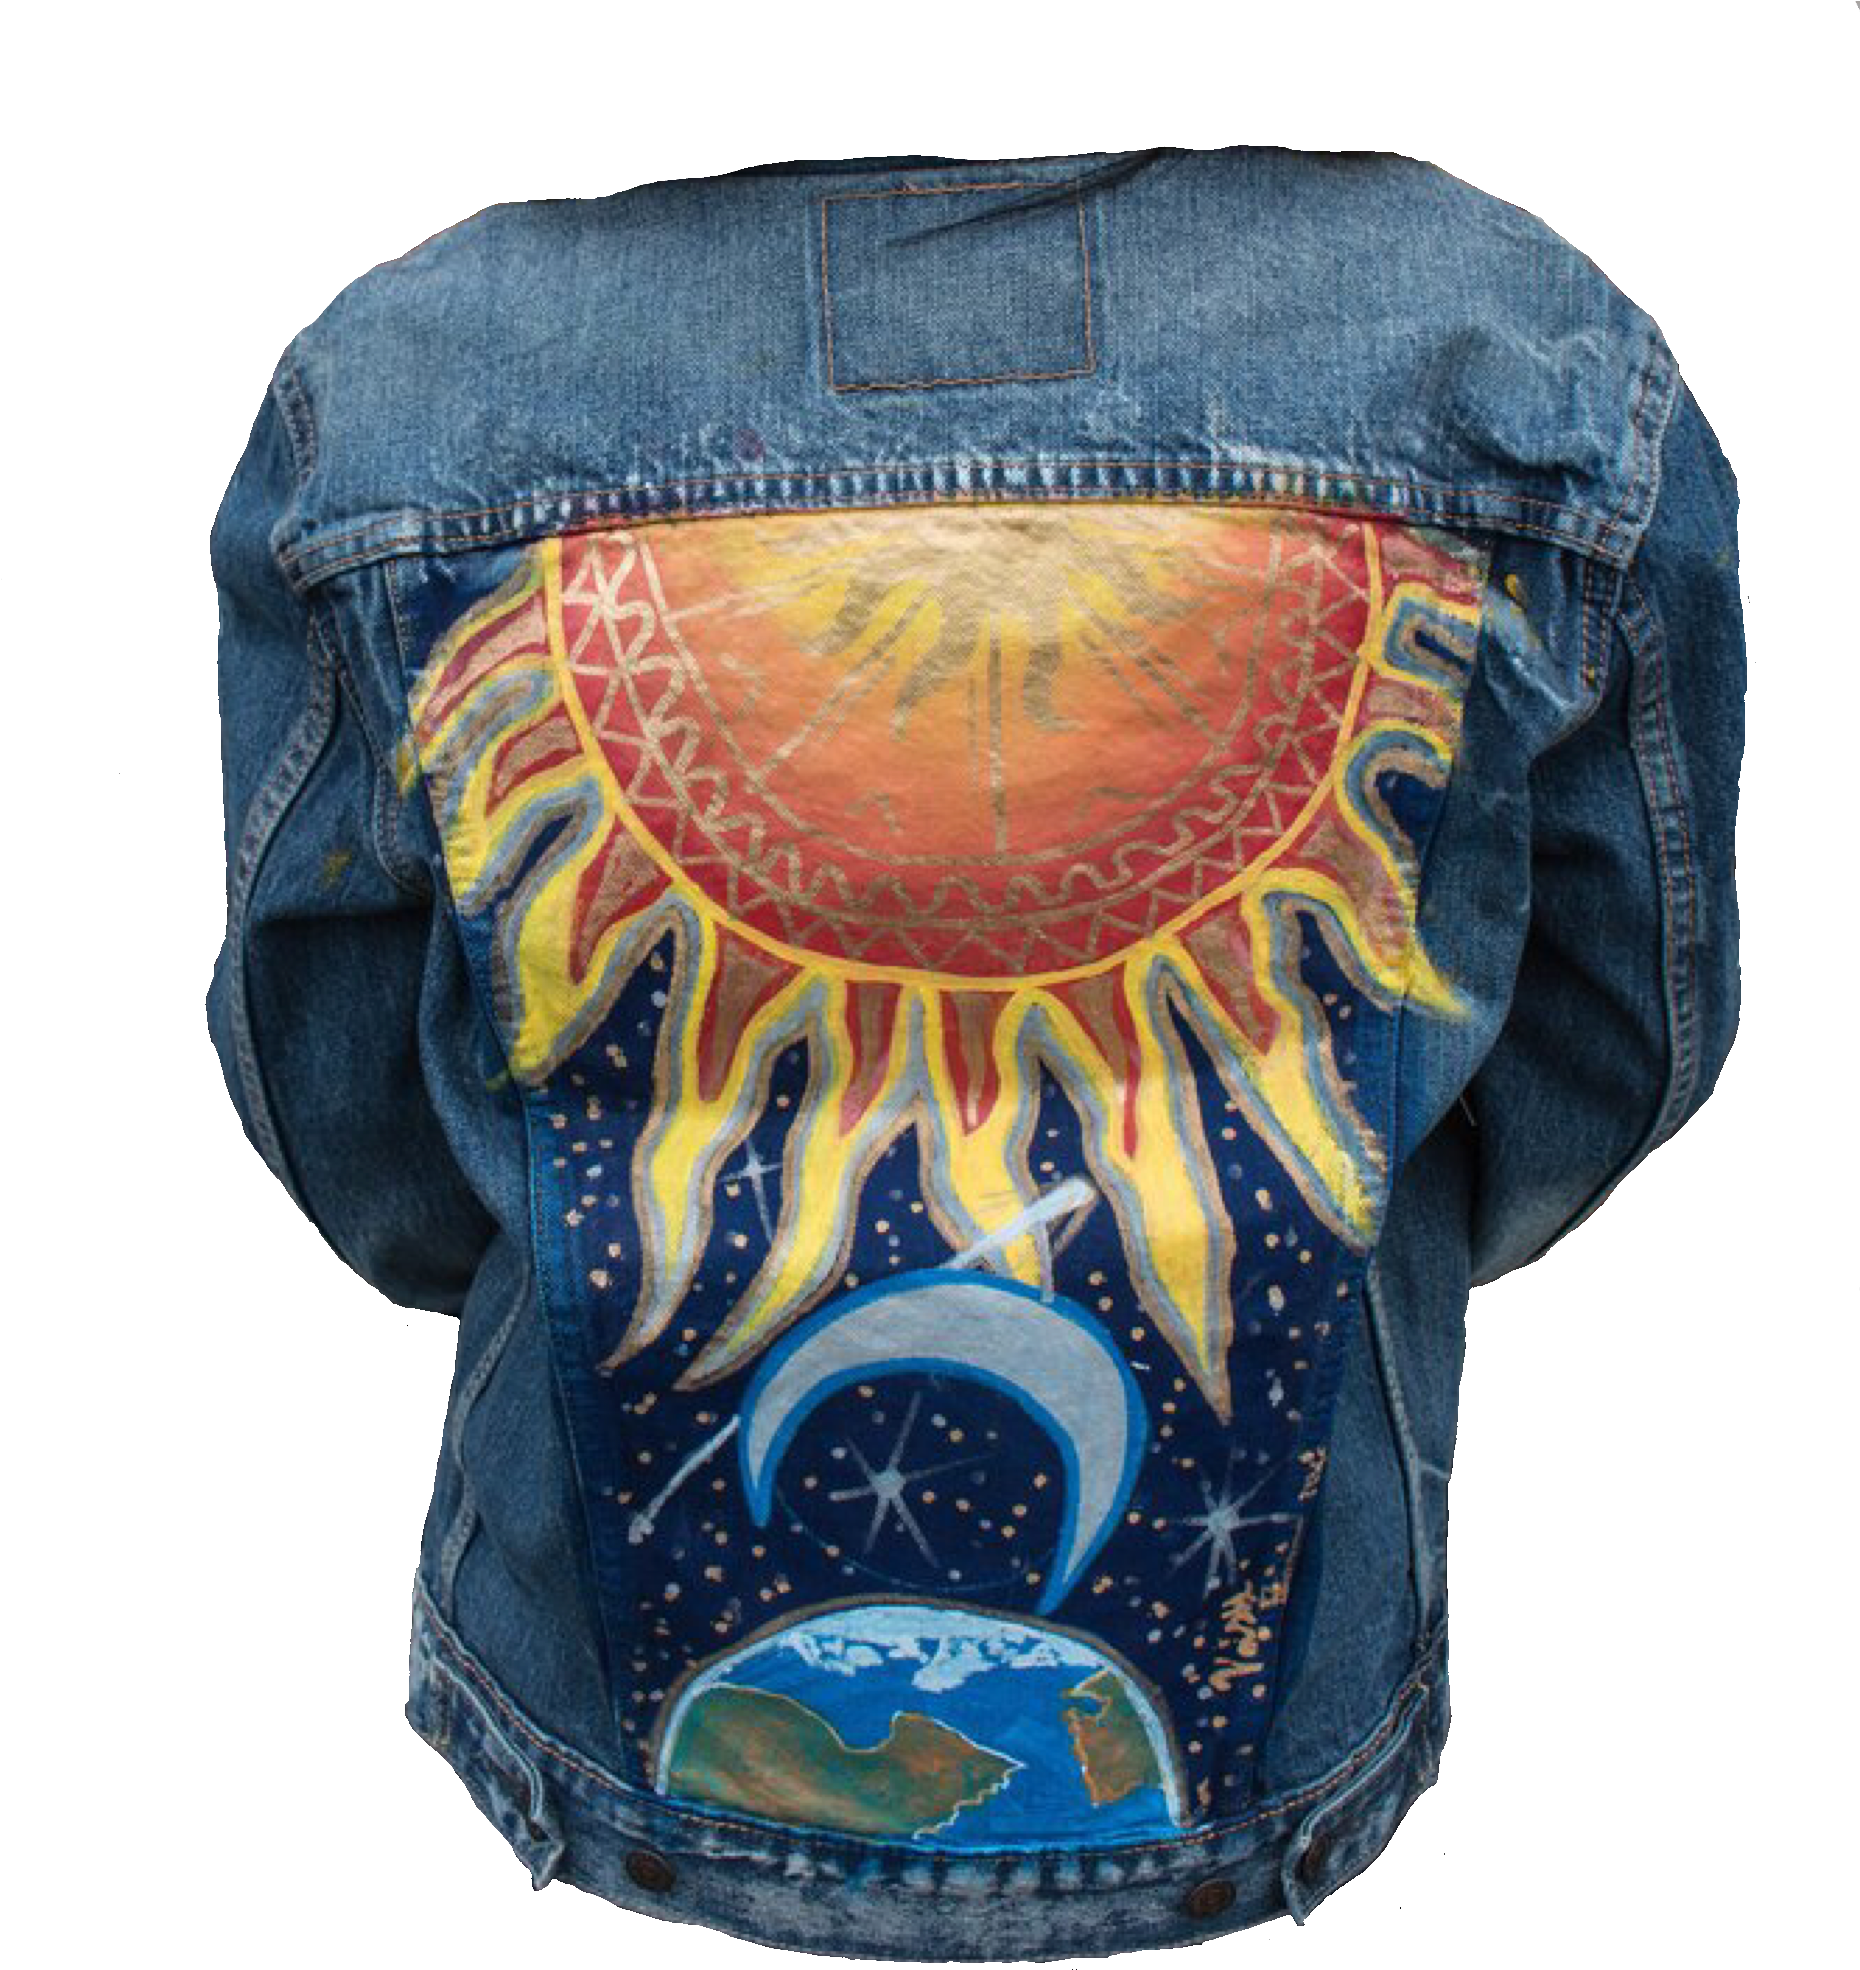 A Back Of A Denim Jacket With A Painted Sun And Earth